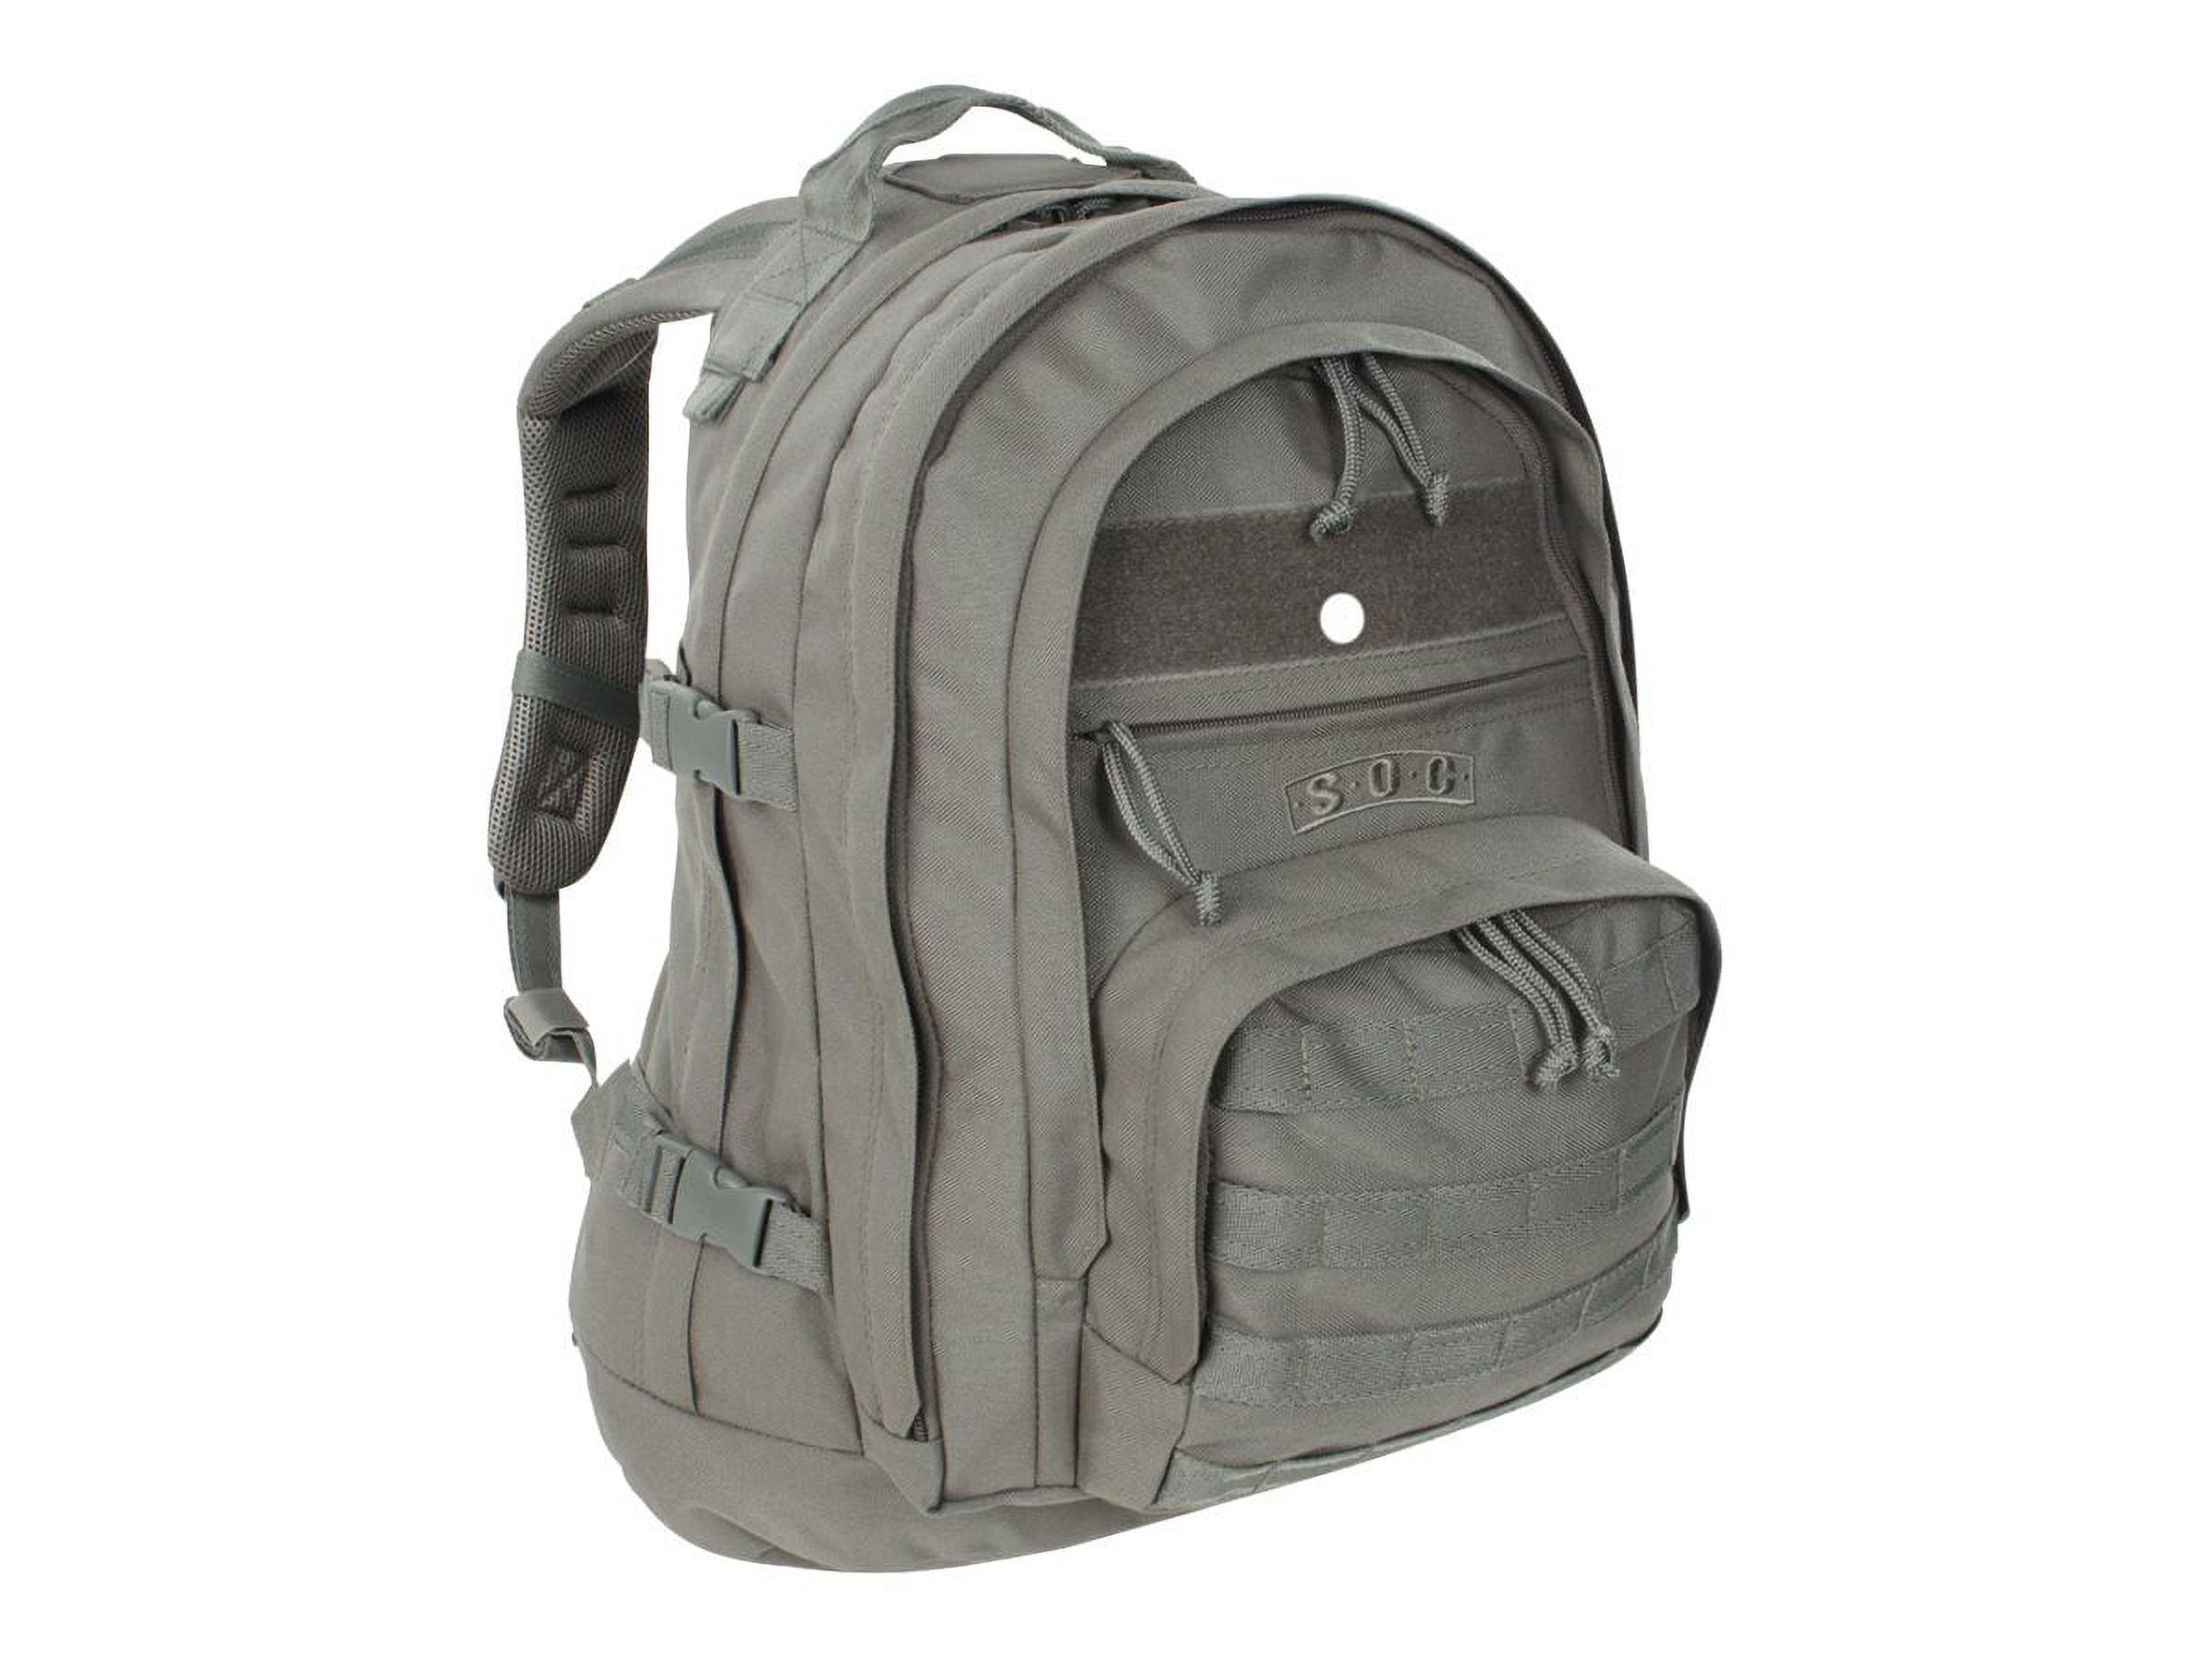 Sandpiper of California Three Day Pass - Backpack M size - 600D poly canvas - foliage green - image 1 of 5